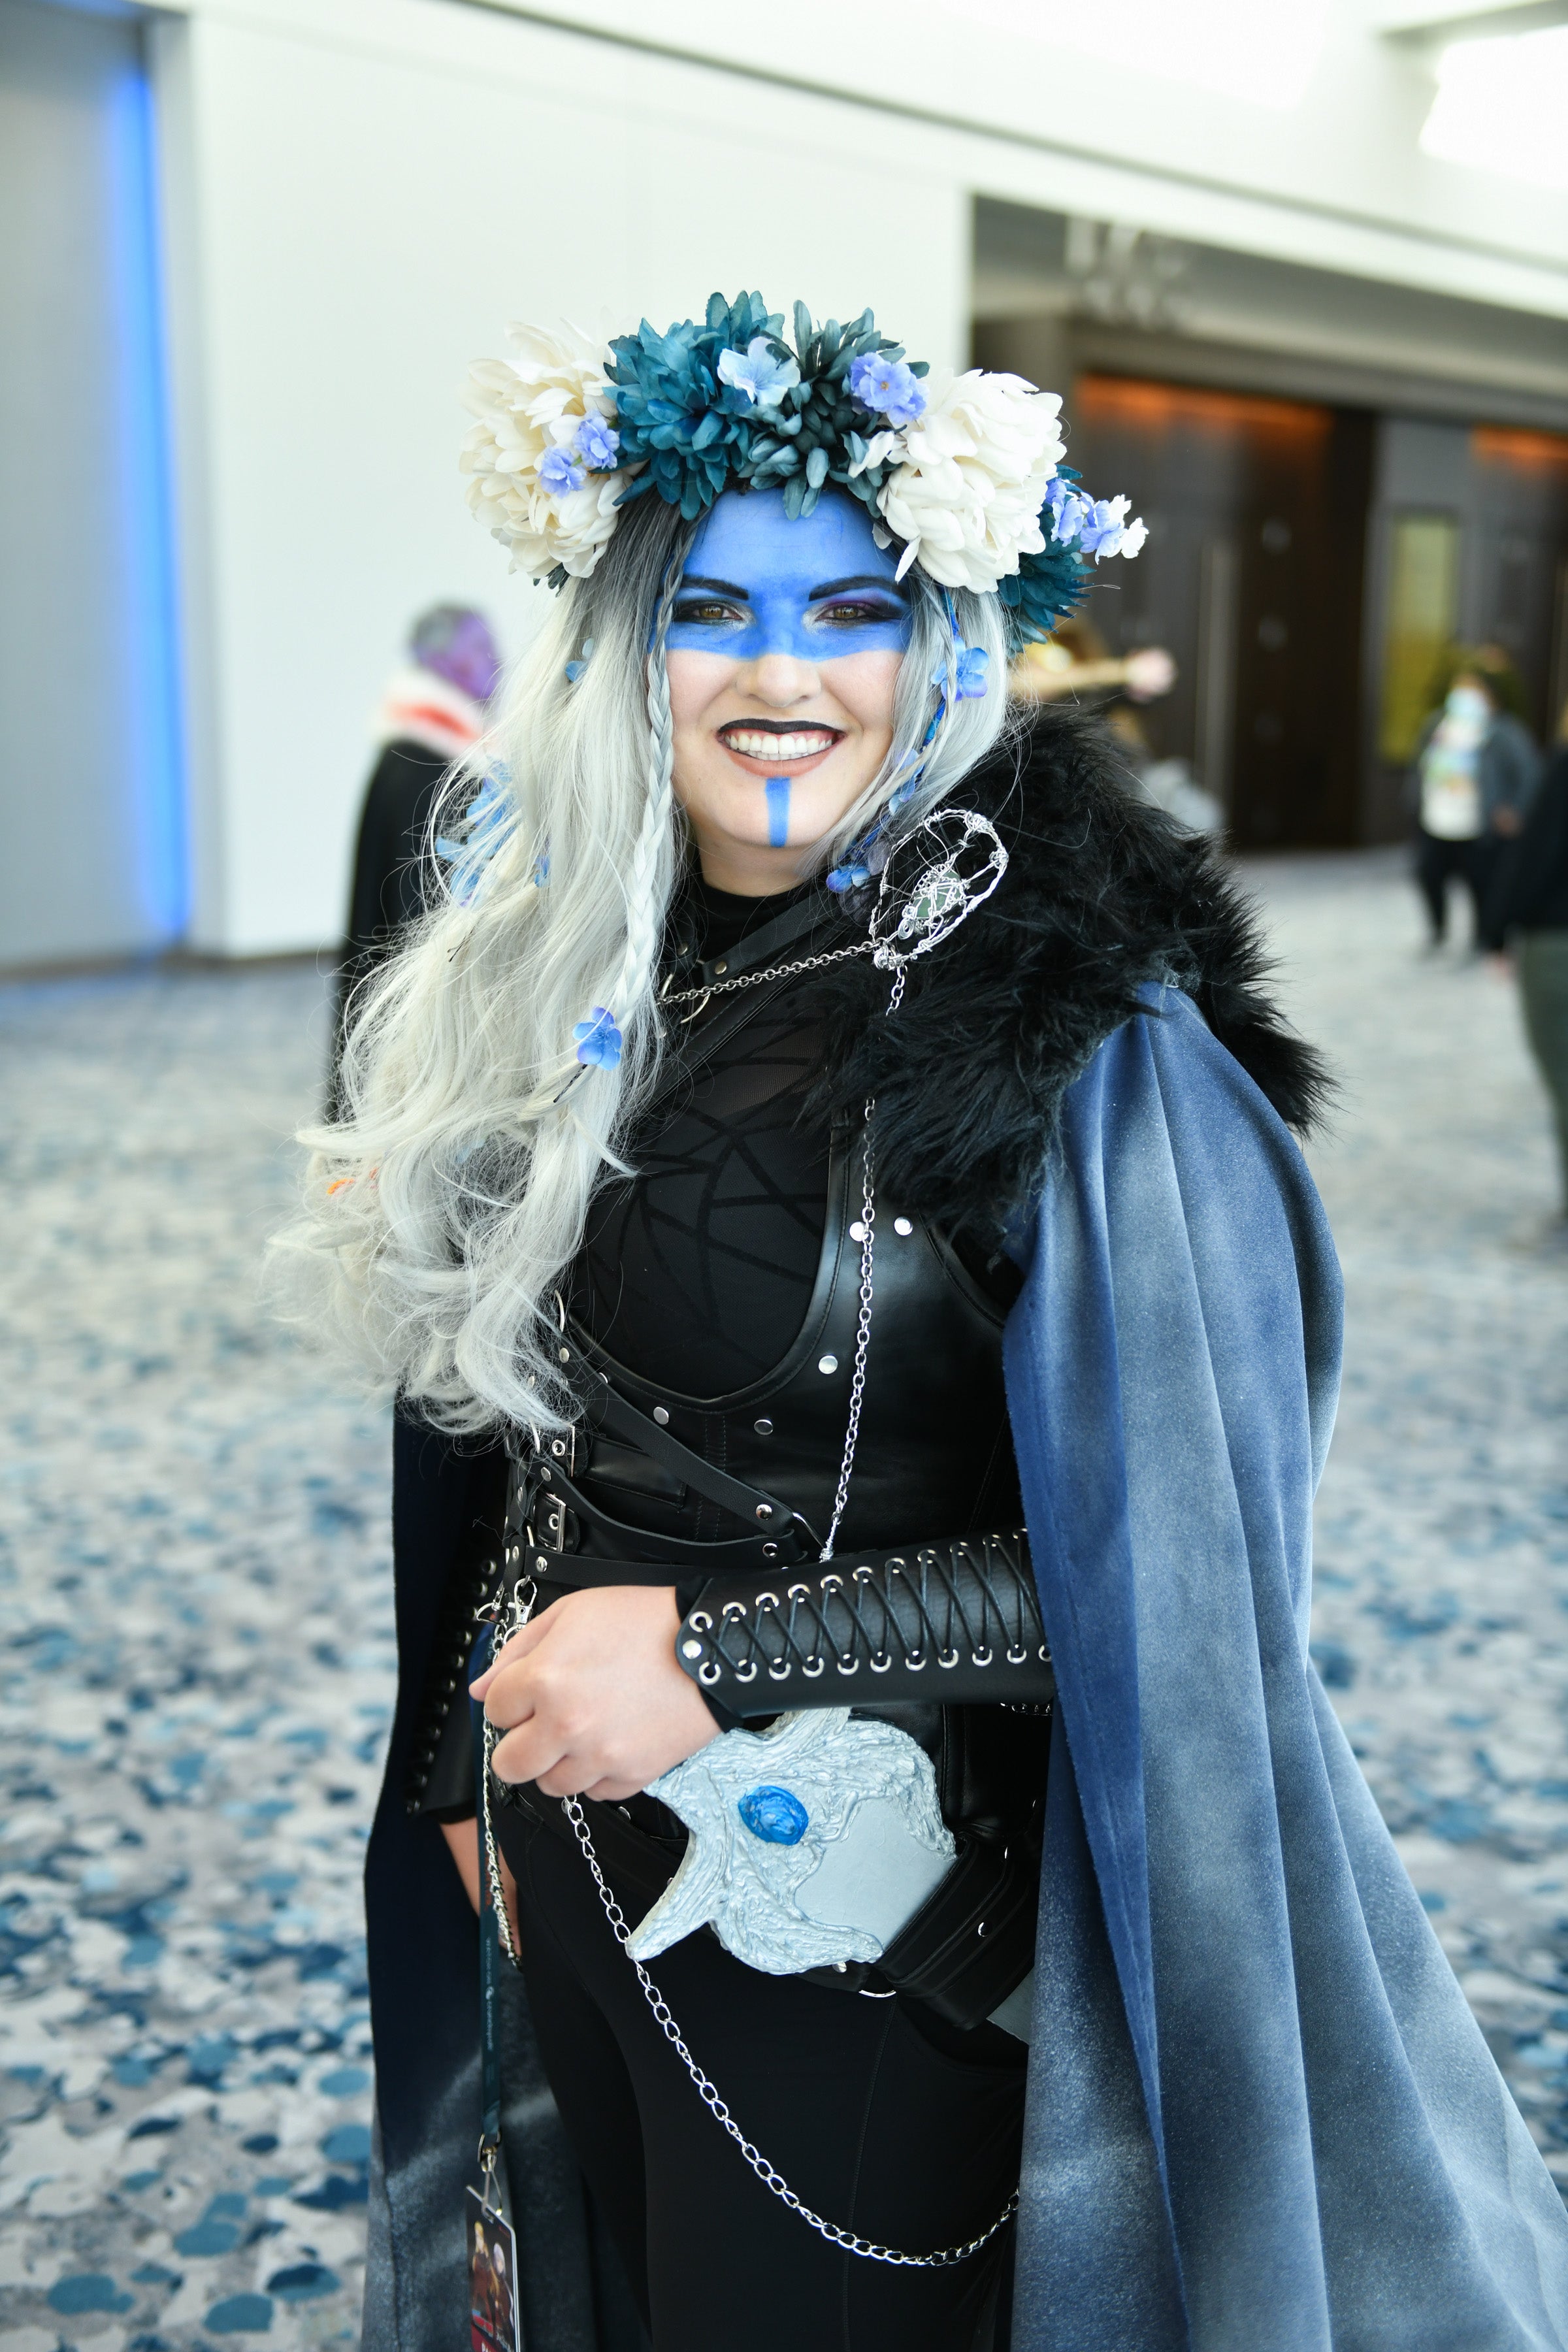 Photos of cosplayers